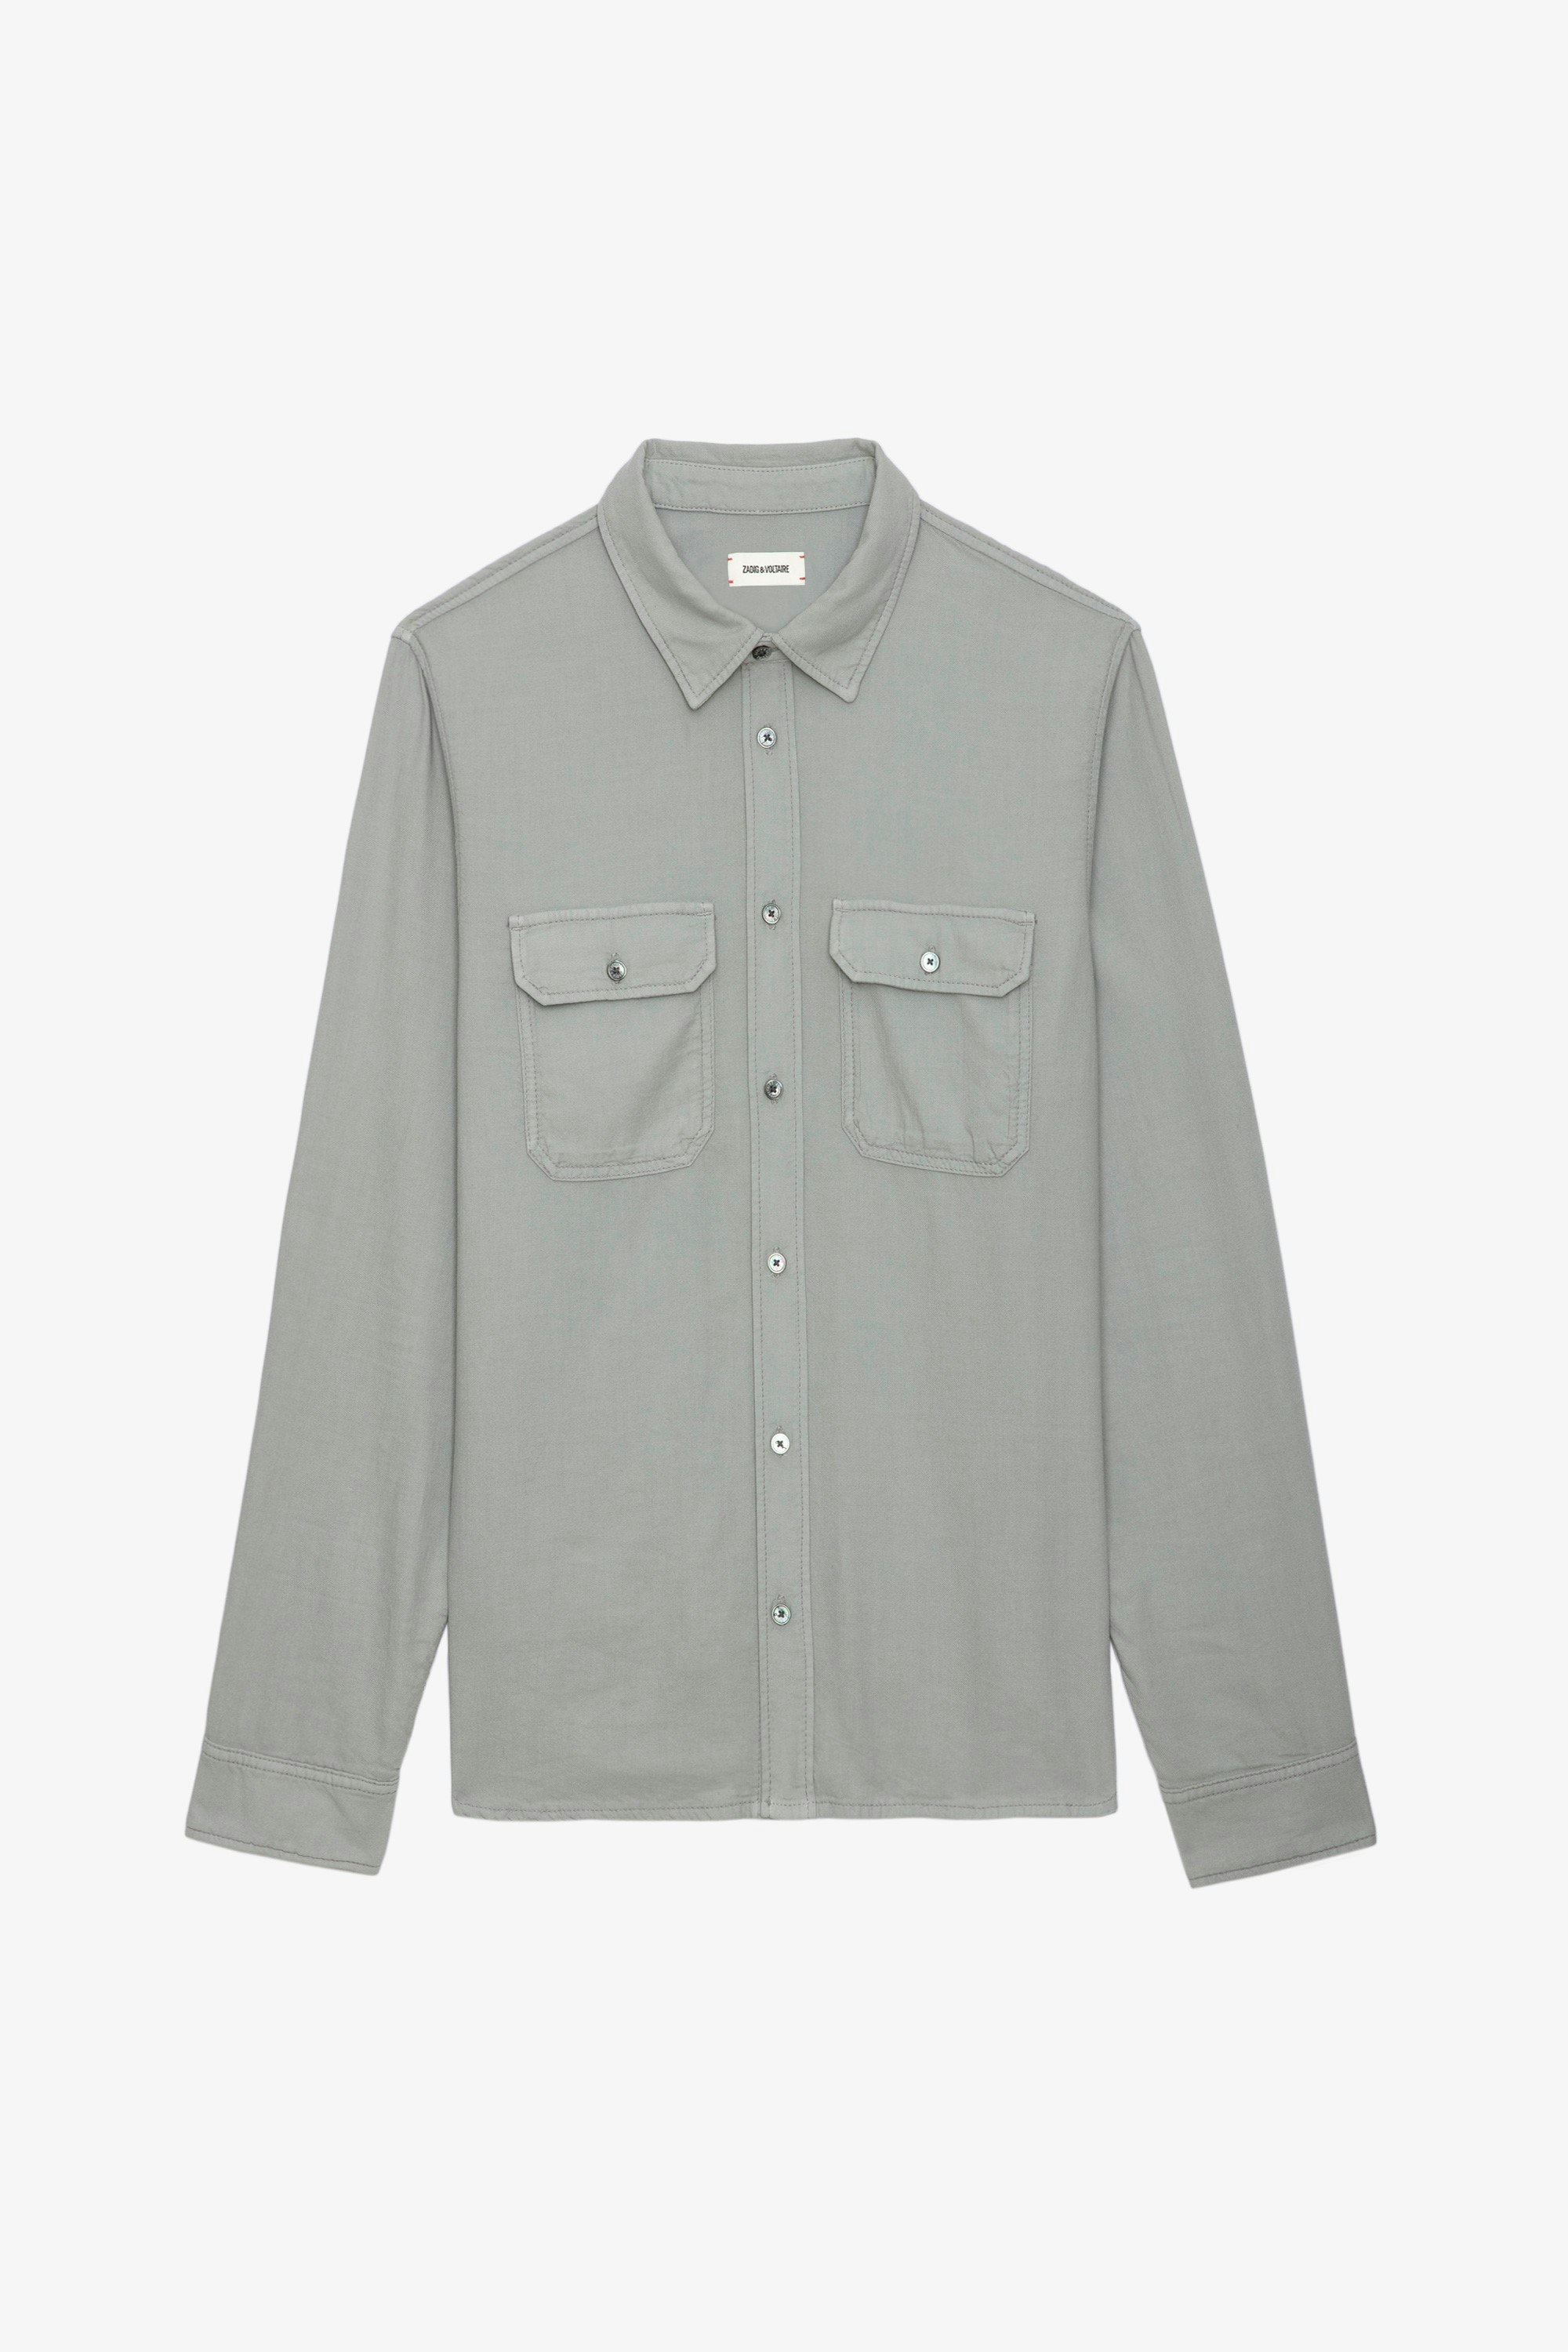 Stan Shirt - Grey long-sleeved shirt with button closure.